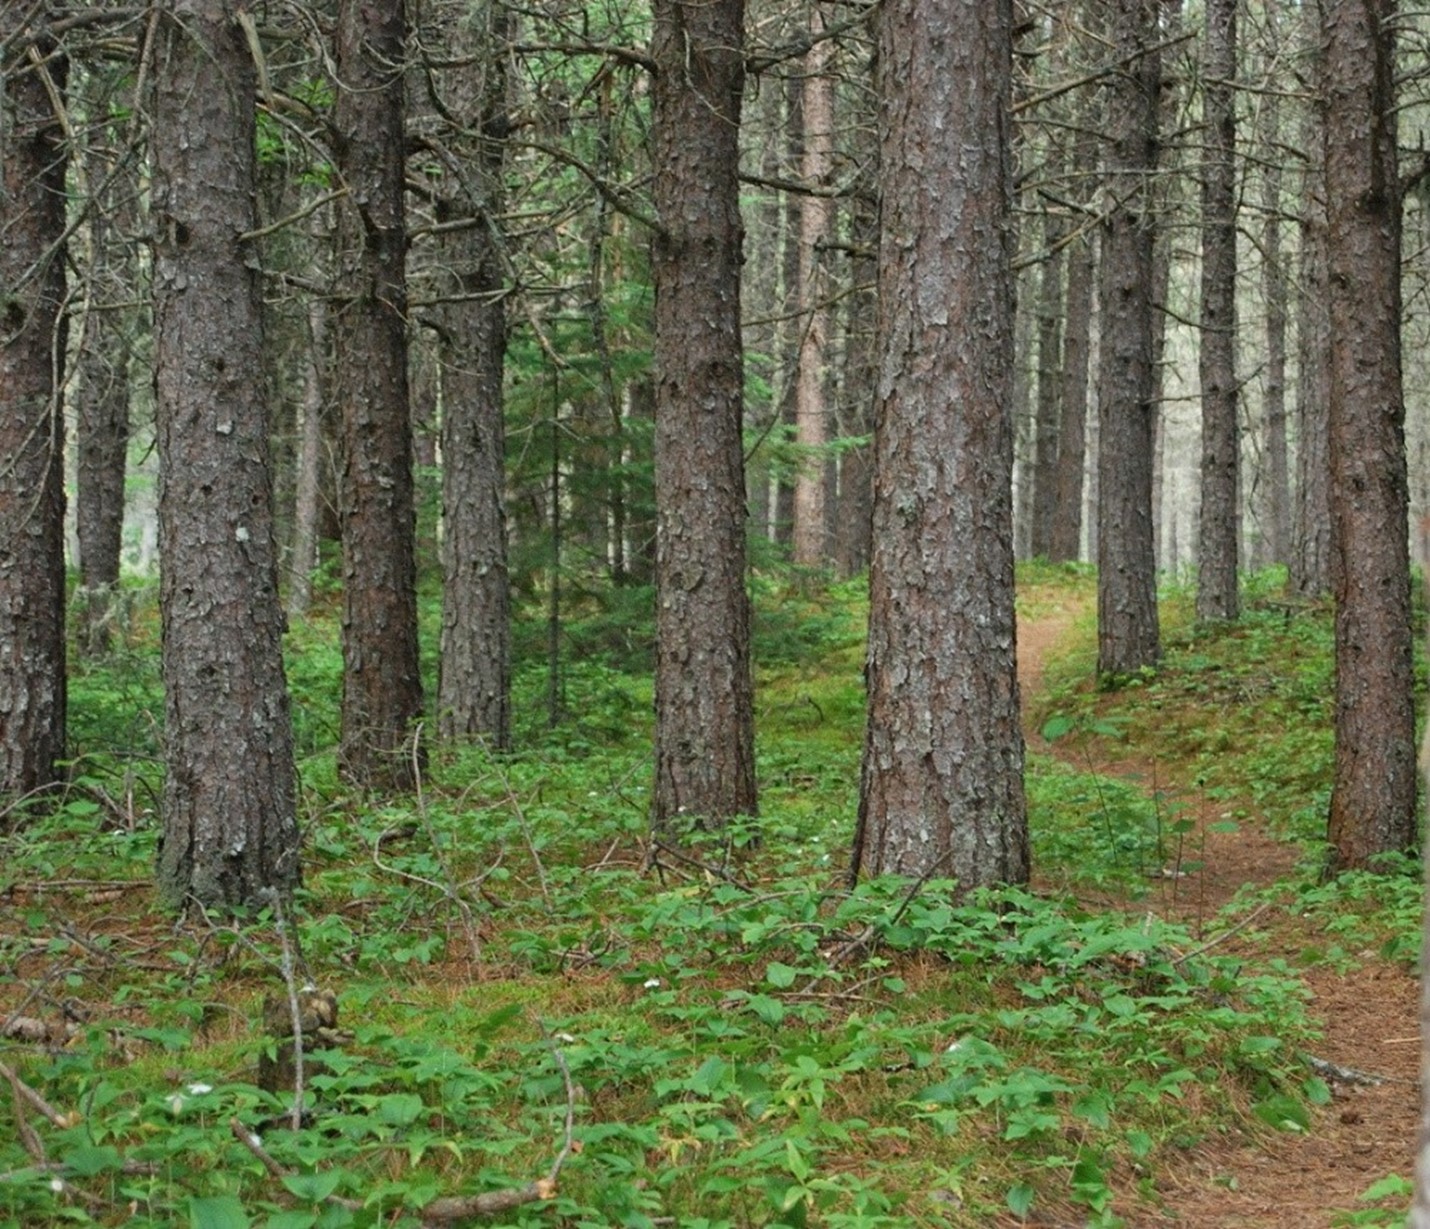 Tall trunks of mature red pine trees, planted closely together. There are small green plants growing around the base of the trunks on the pine needle-covered forest floor